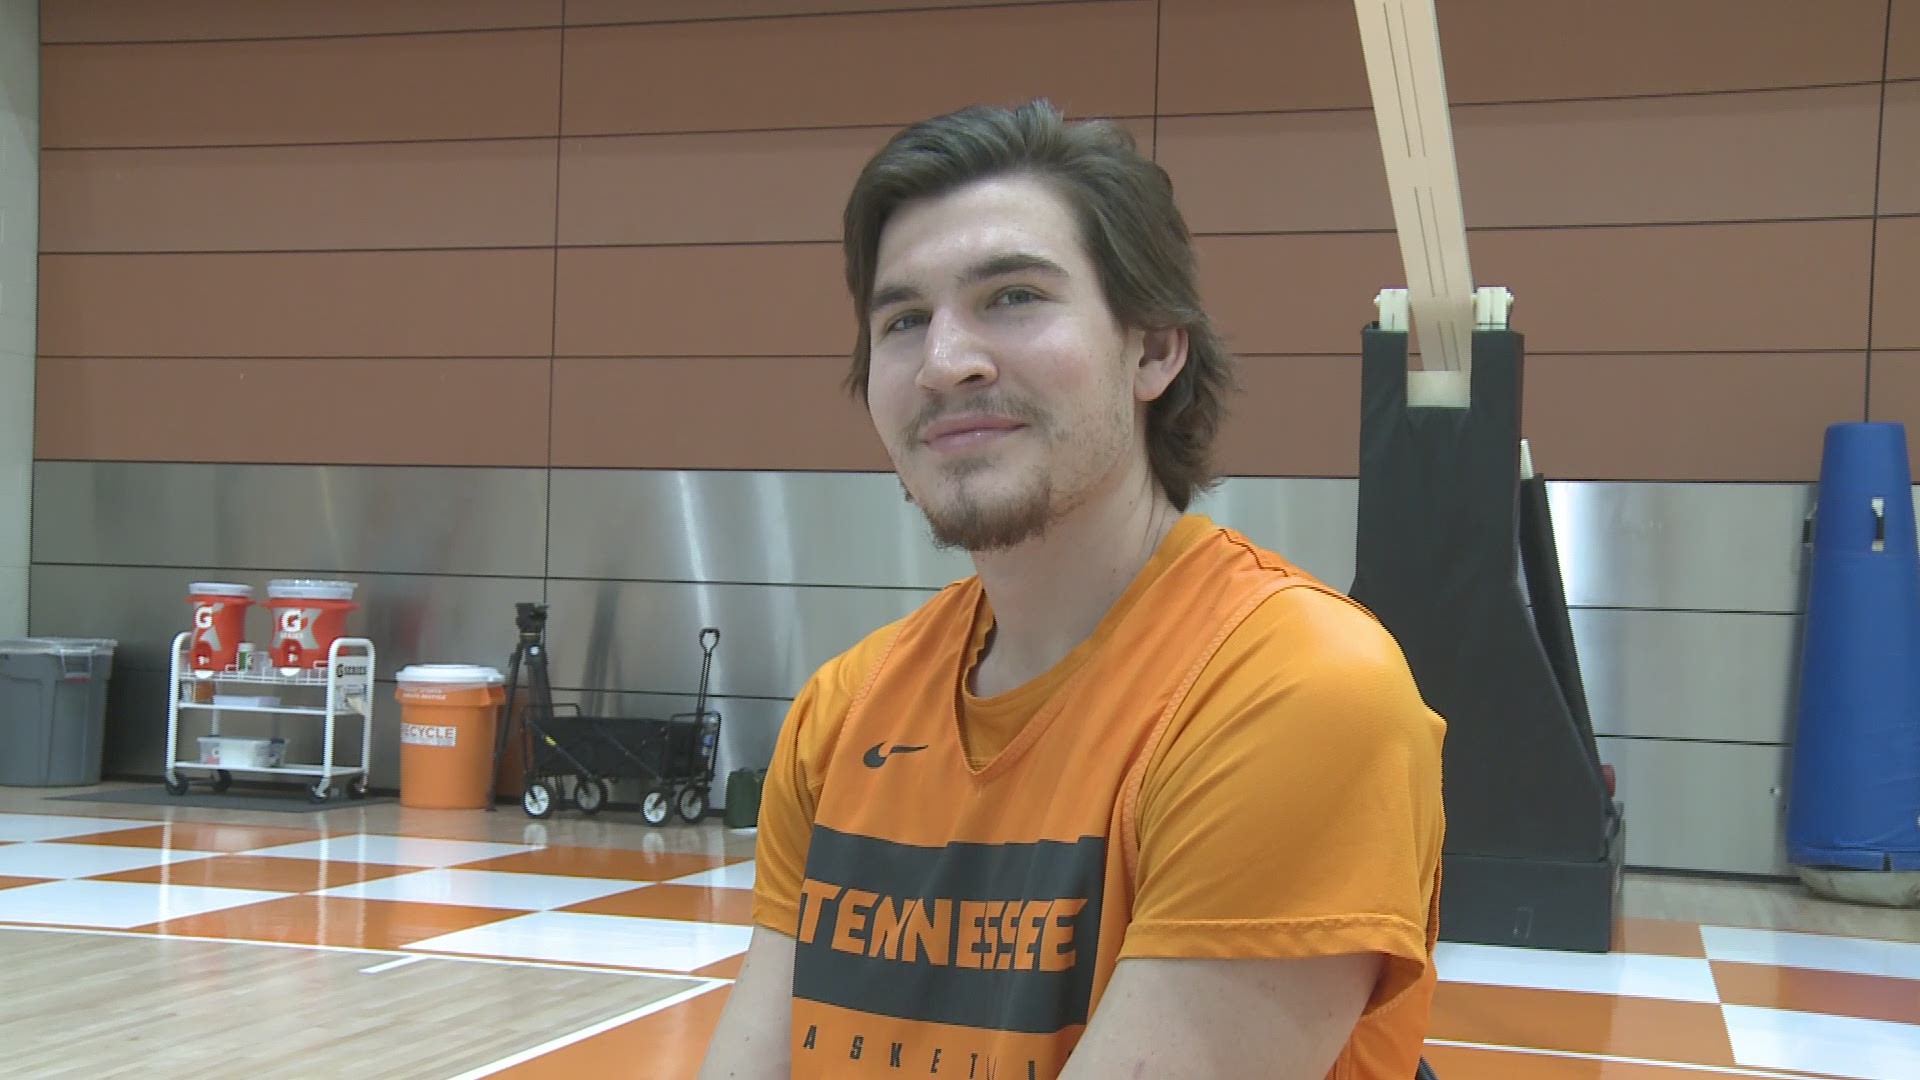 According the UT basketball media guide, John Fulkerson makes "questionable choices when it comes to hairstyle and facial hair." Fulkerson says that's just jealousy.